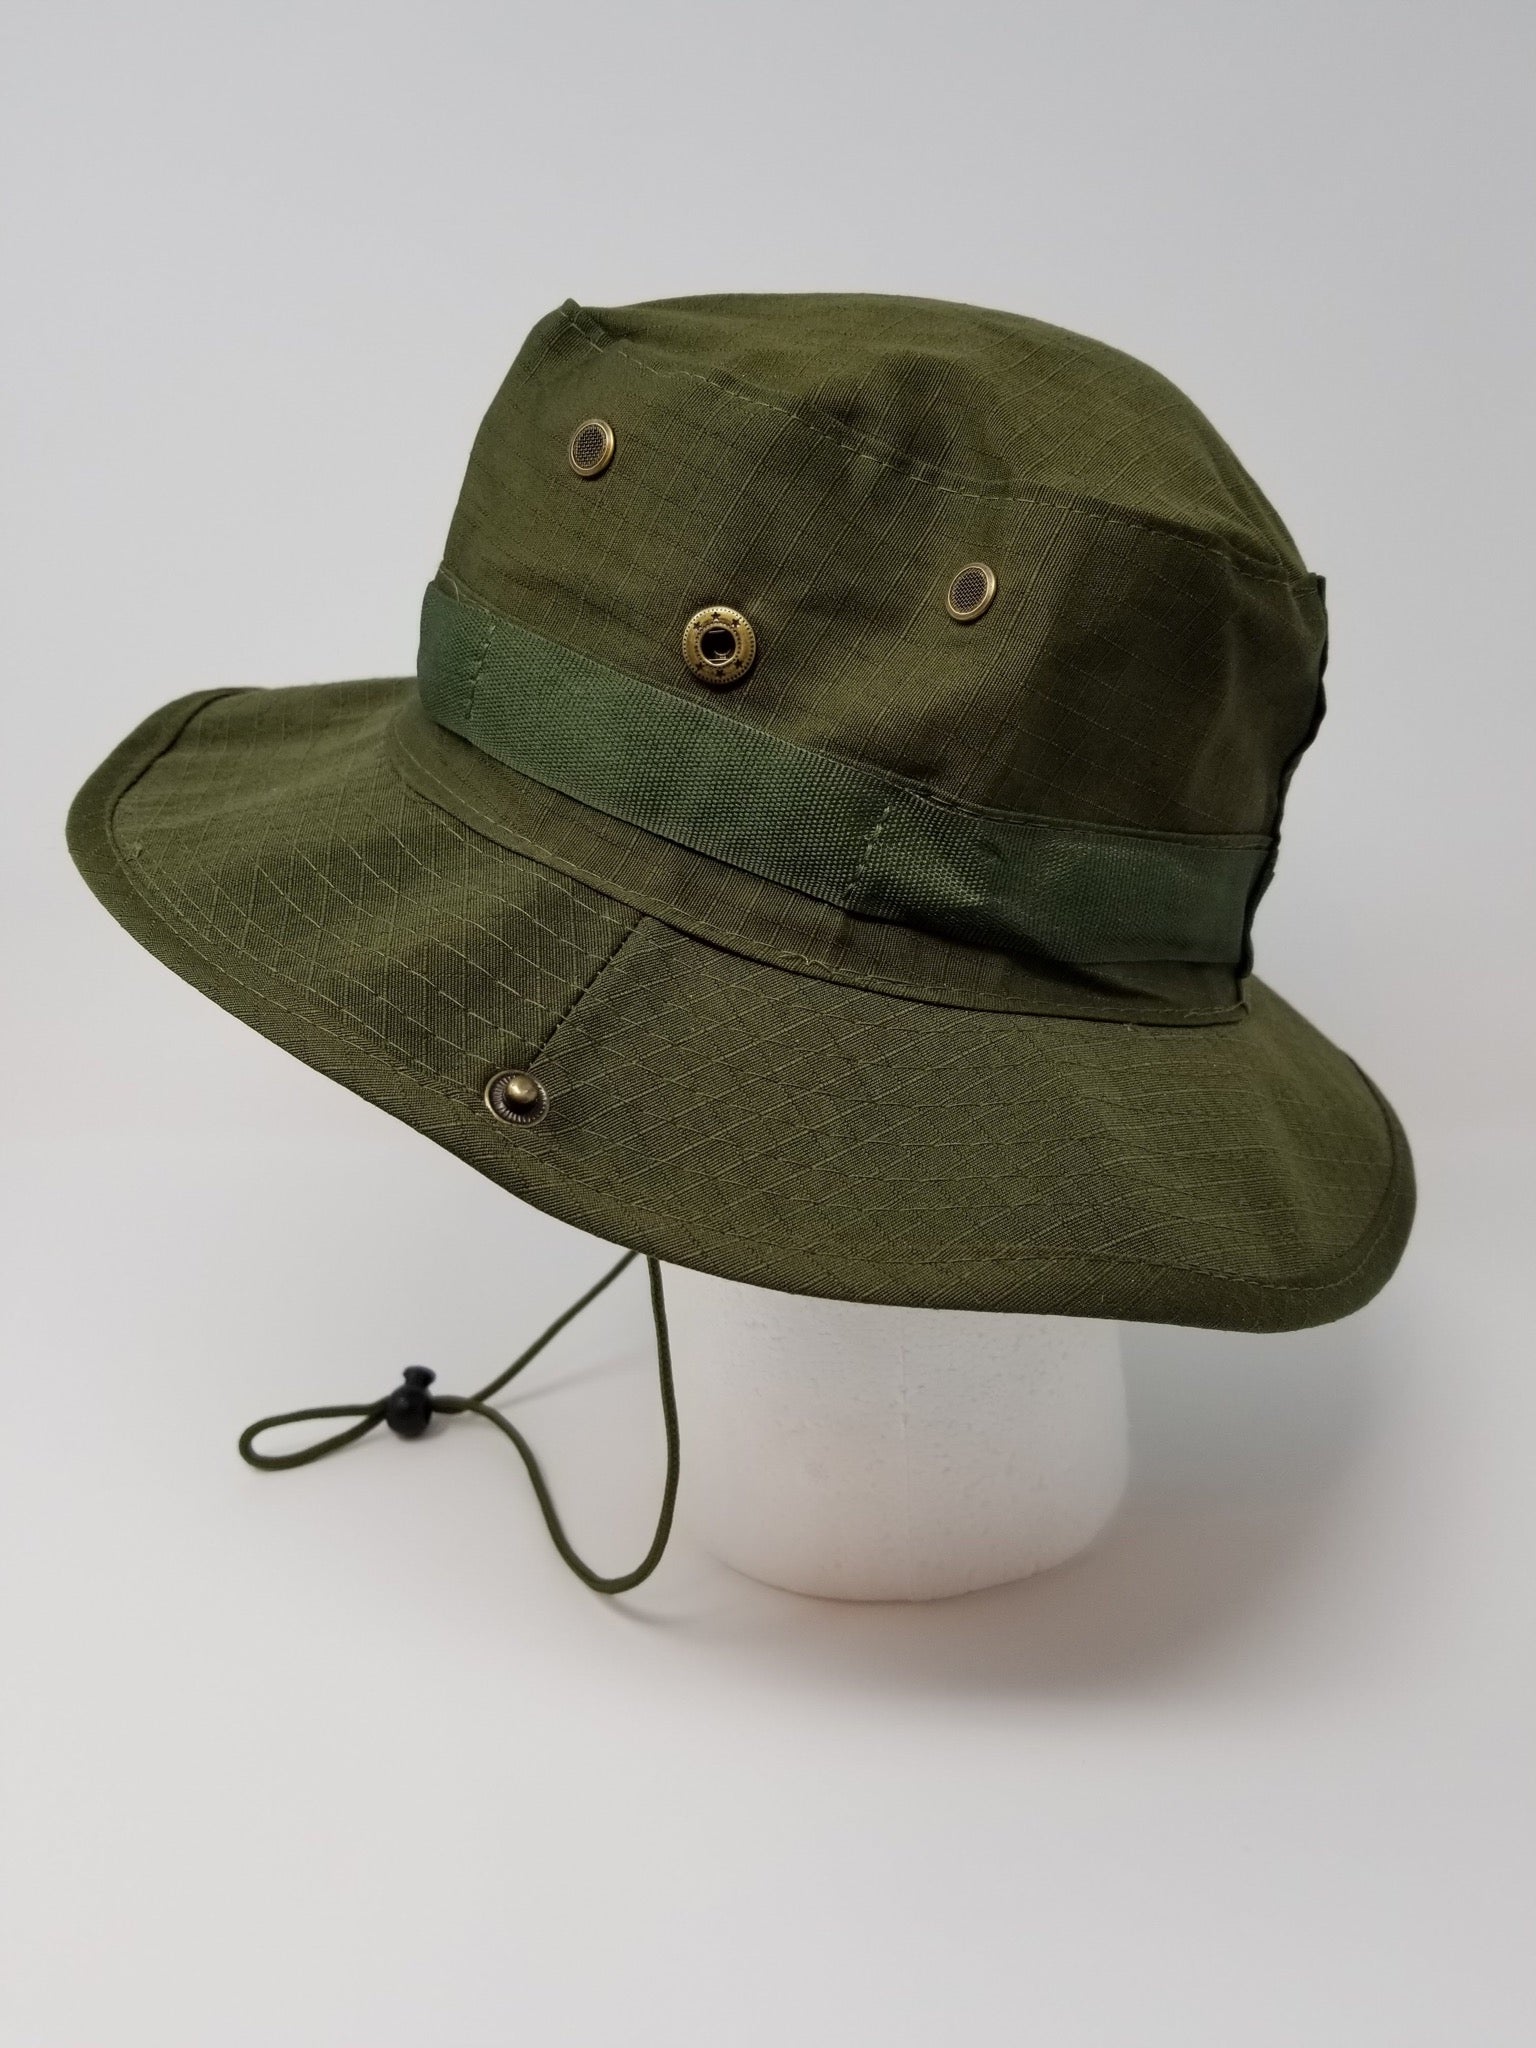 Tactical Boonie Hat Military Camo Bucket Wide Brim Sun Hunting Travel Hiking Cap - Badger Survival Online